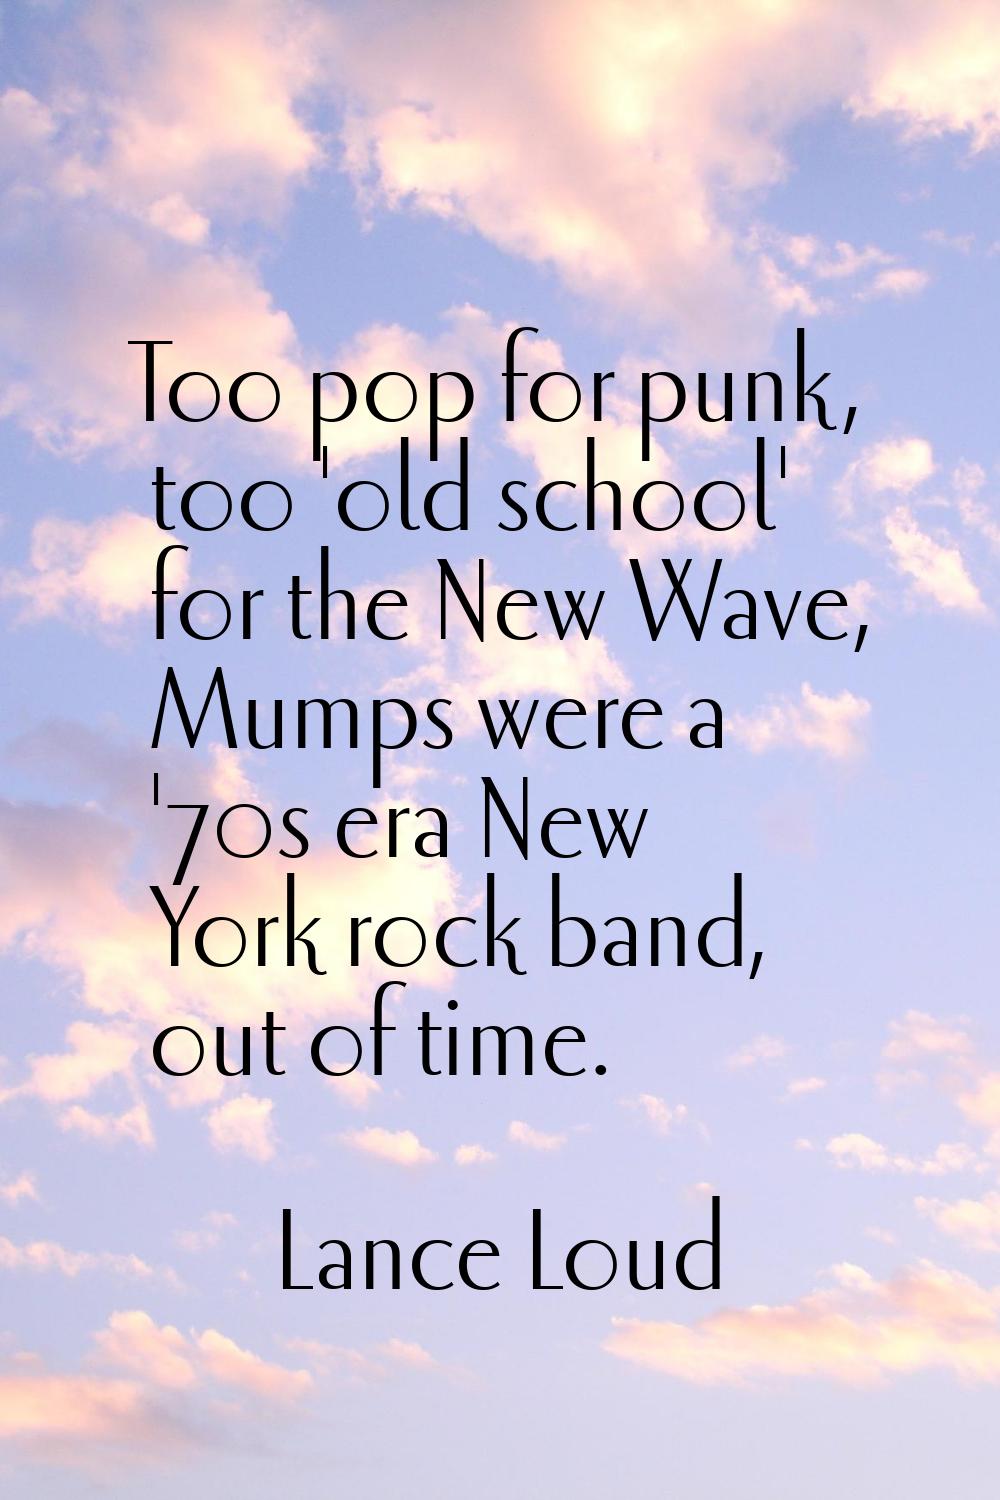 Too pop for punk, too 'old school' for the New Wave, Mumps were a '70s era New York rock band, out 